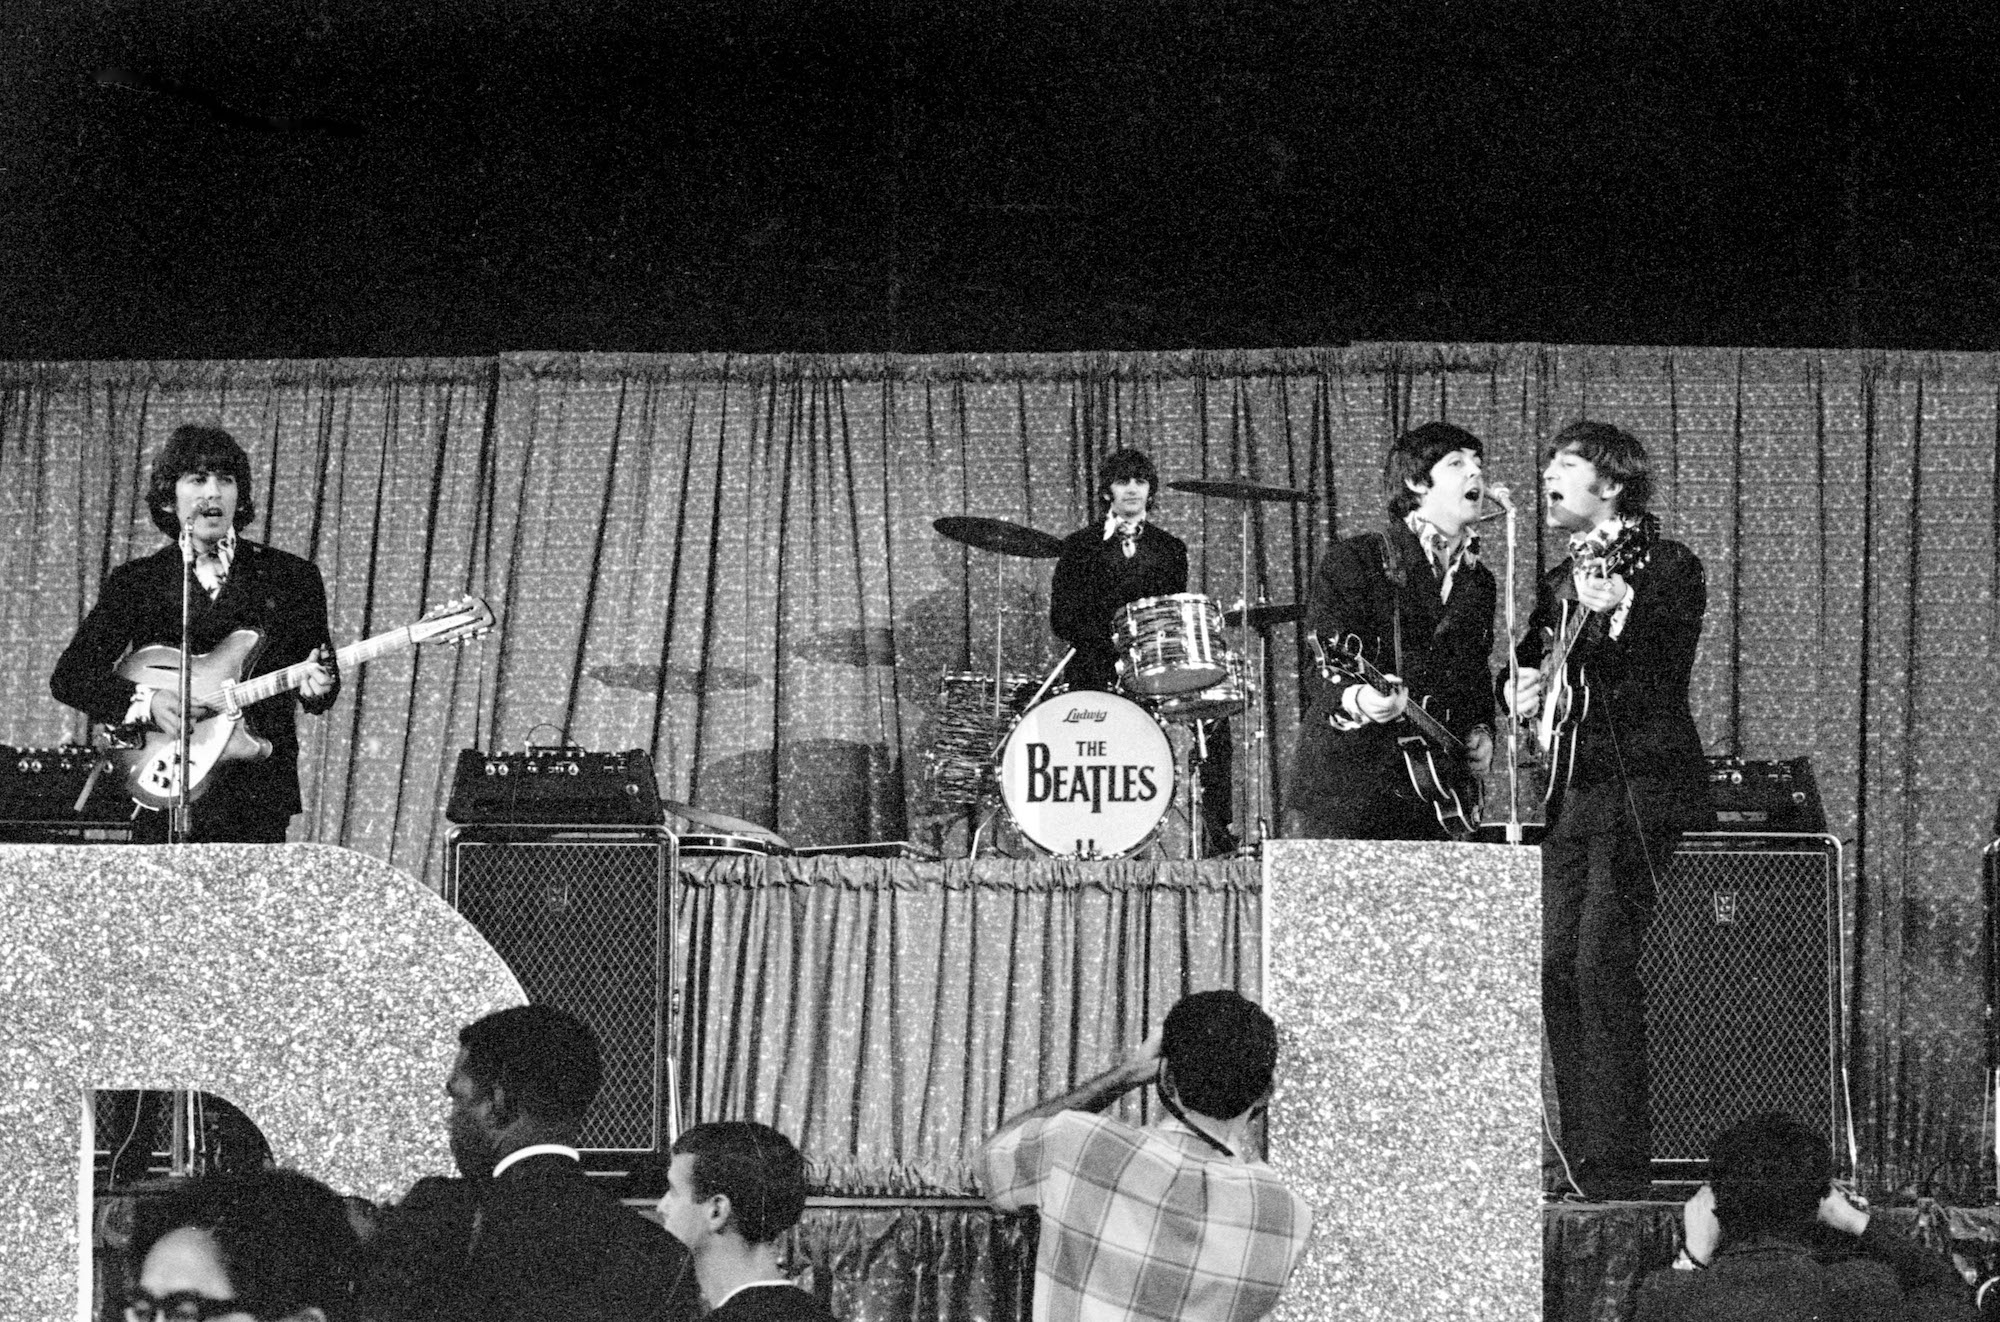 The Beatles performing at Dodger Stadium in 1966